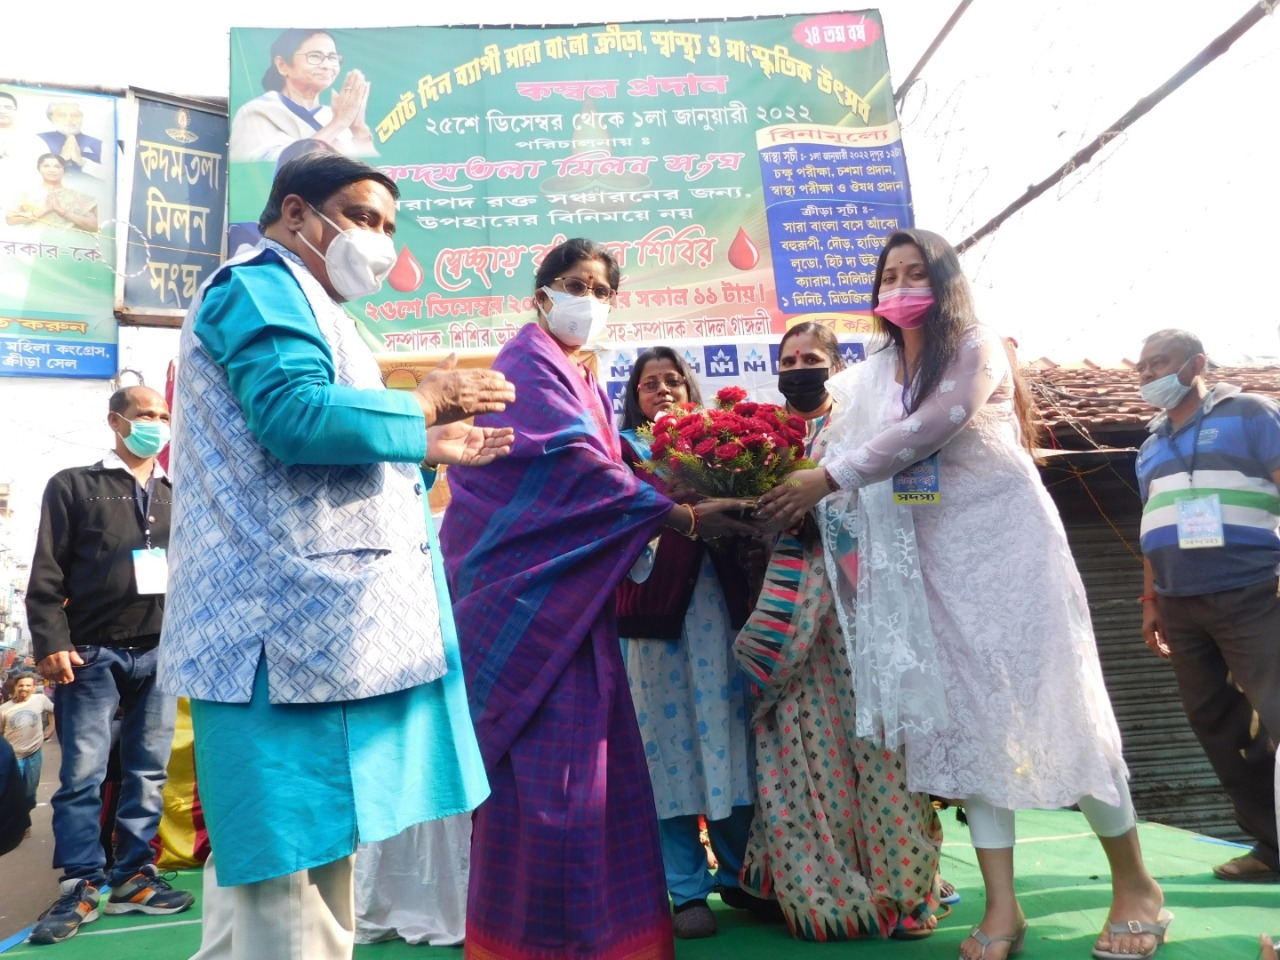 Presence of Dr. Shashi Panja, cabinet minister, Govt. Of WB for Dept. Of Women and Child Development and Social Welfare, at the Vaccination drive.